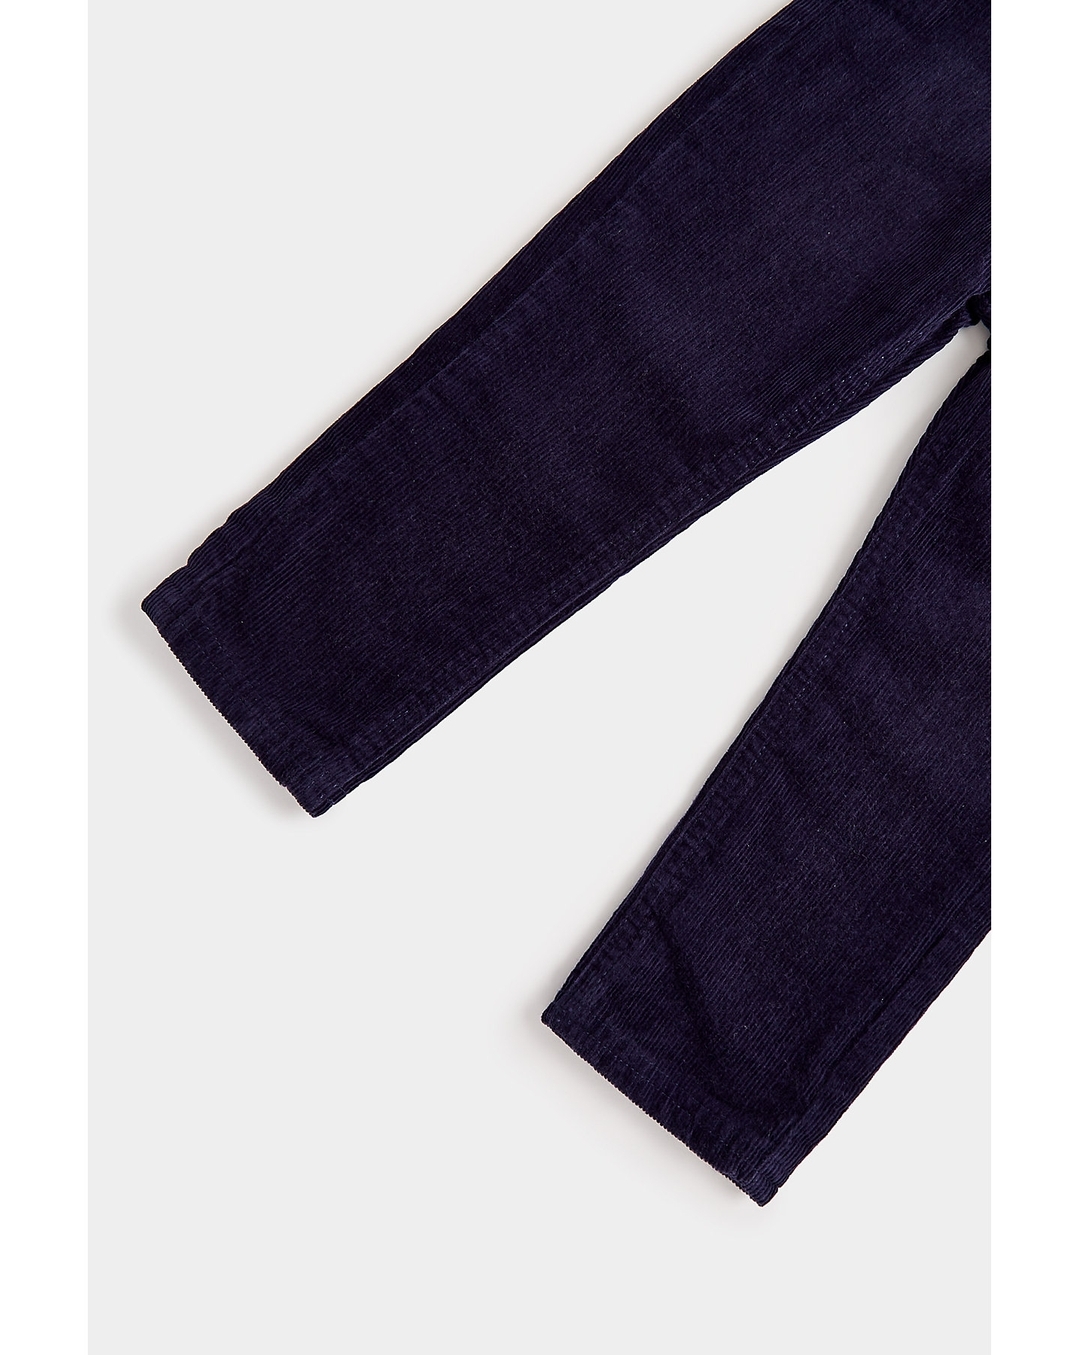 Buy Boys Corduroy Trousers Navy Online at Best Price  Mothercare